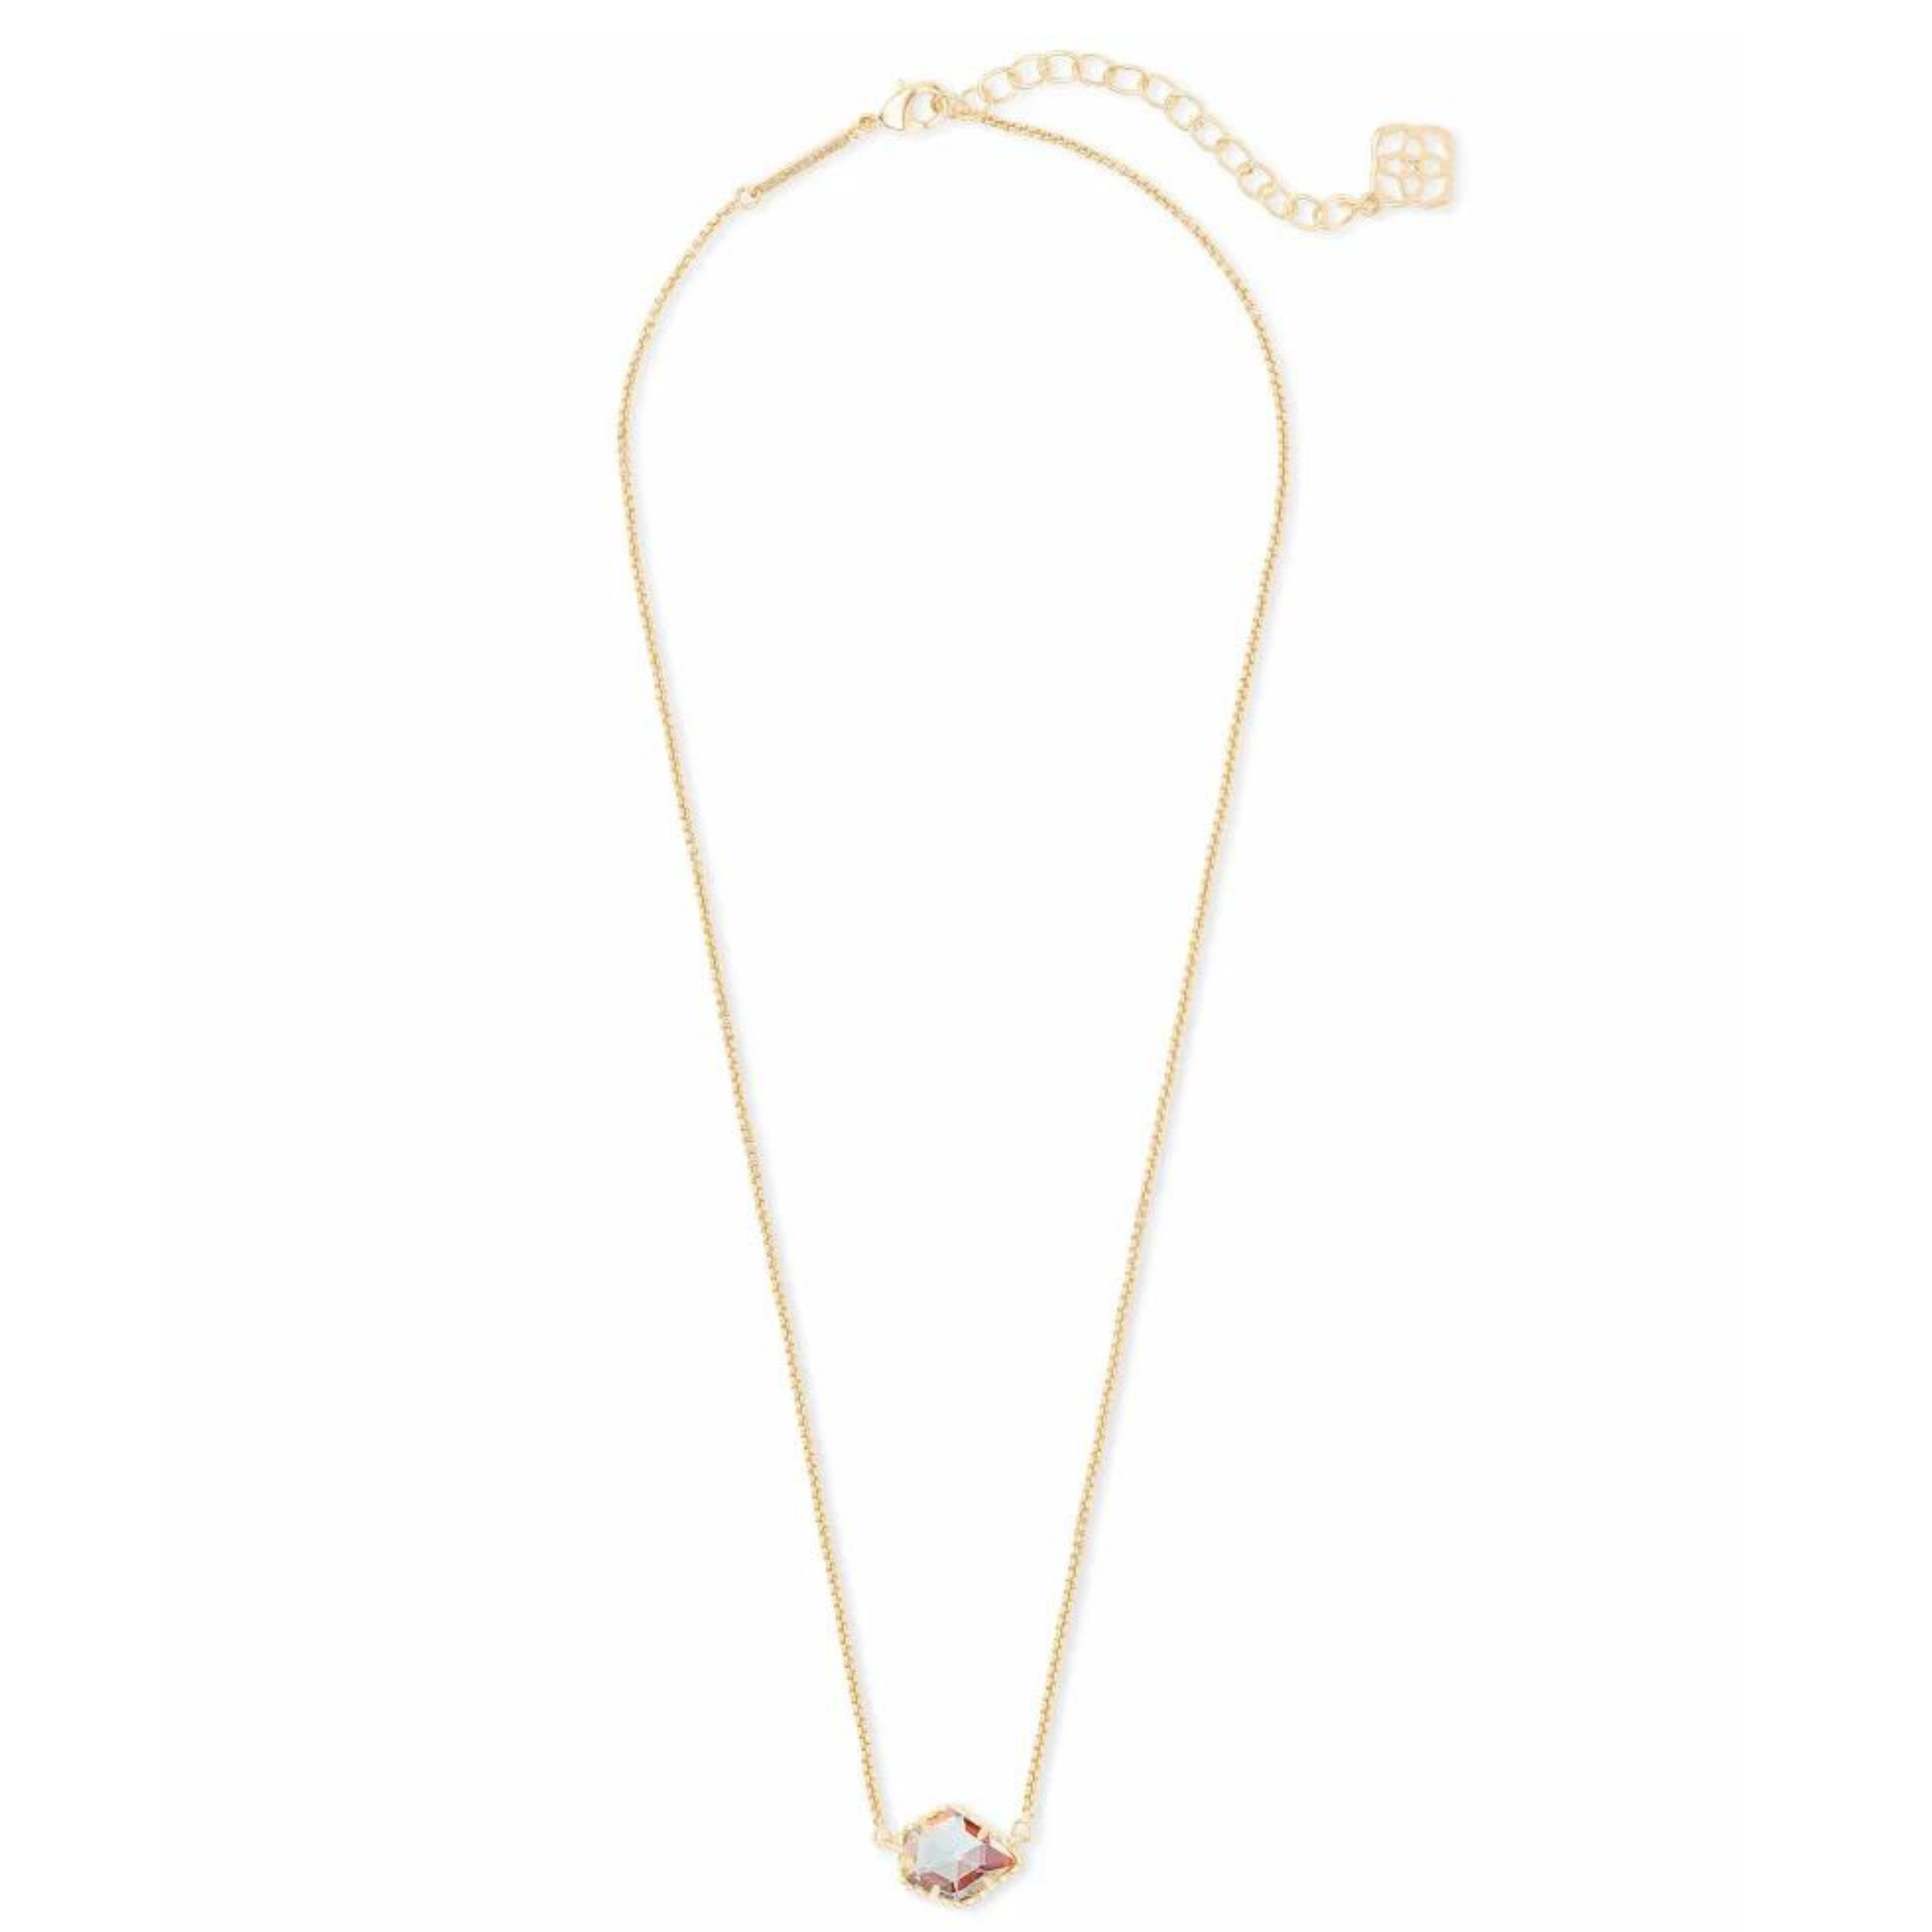 Kendra Scott | Tess Gold Pendant Necklace in Dichroic Glass - Giddy Up Glamour Boutique